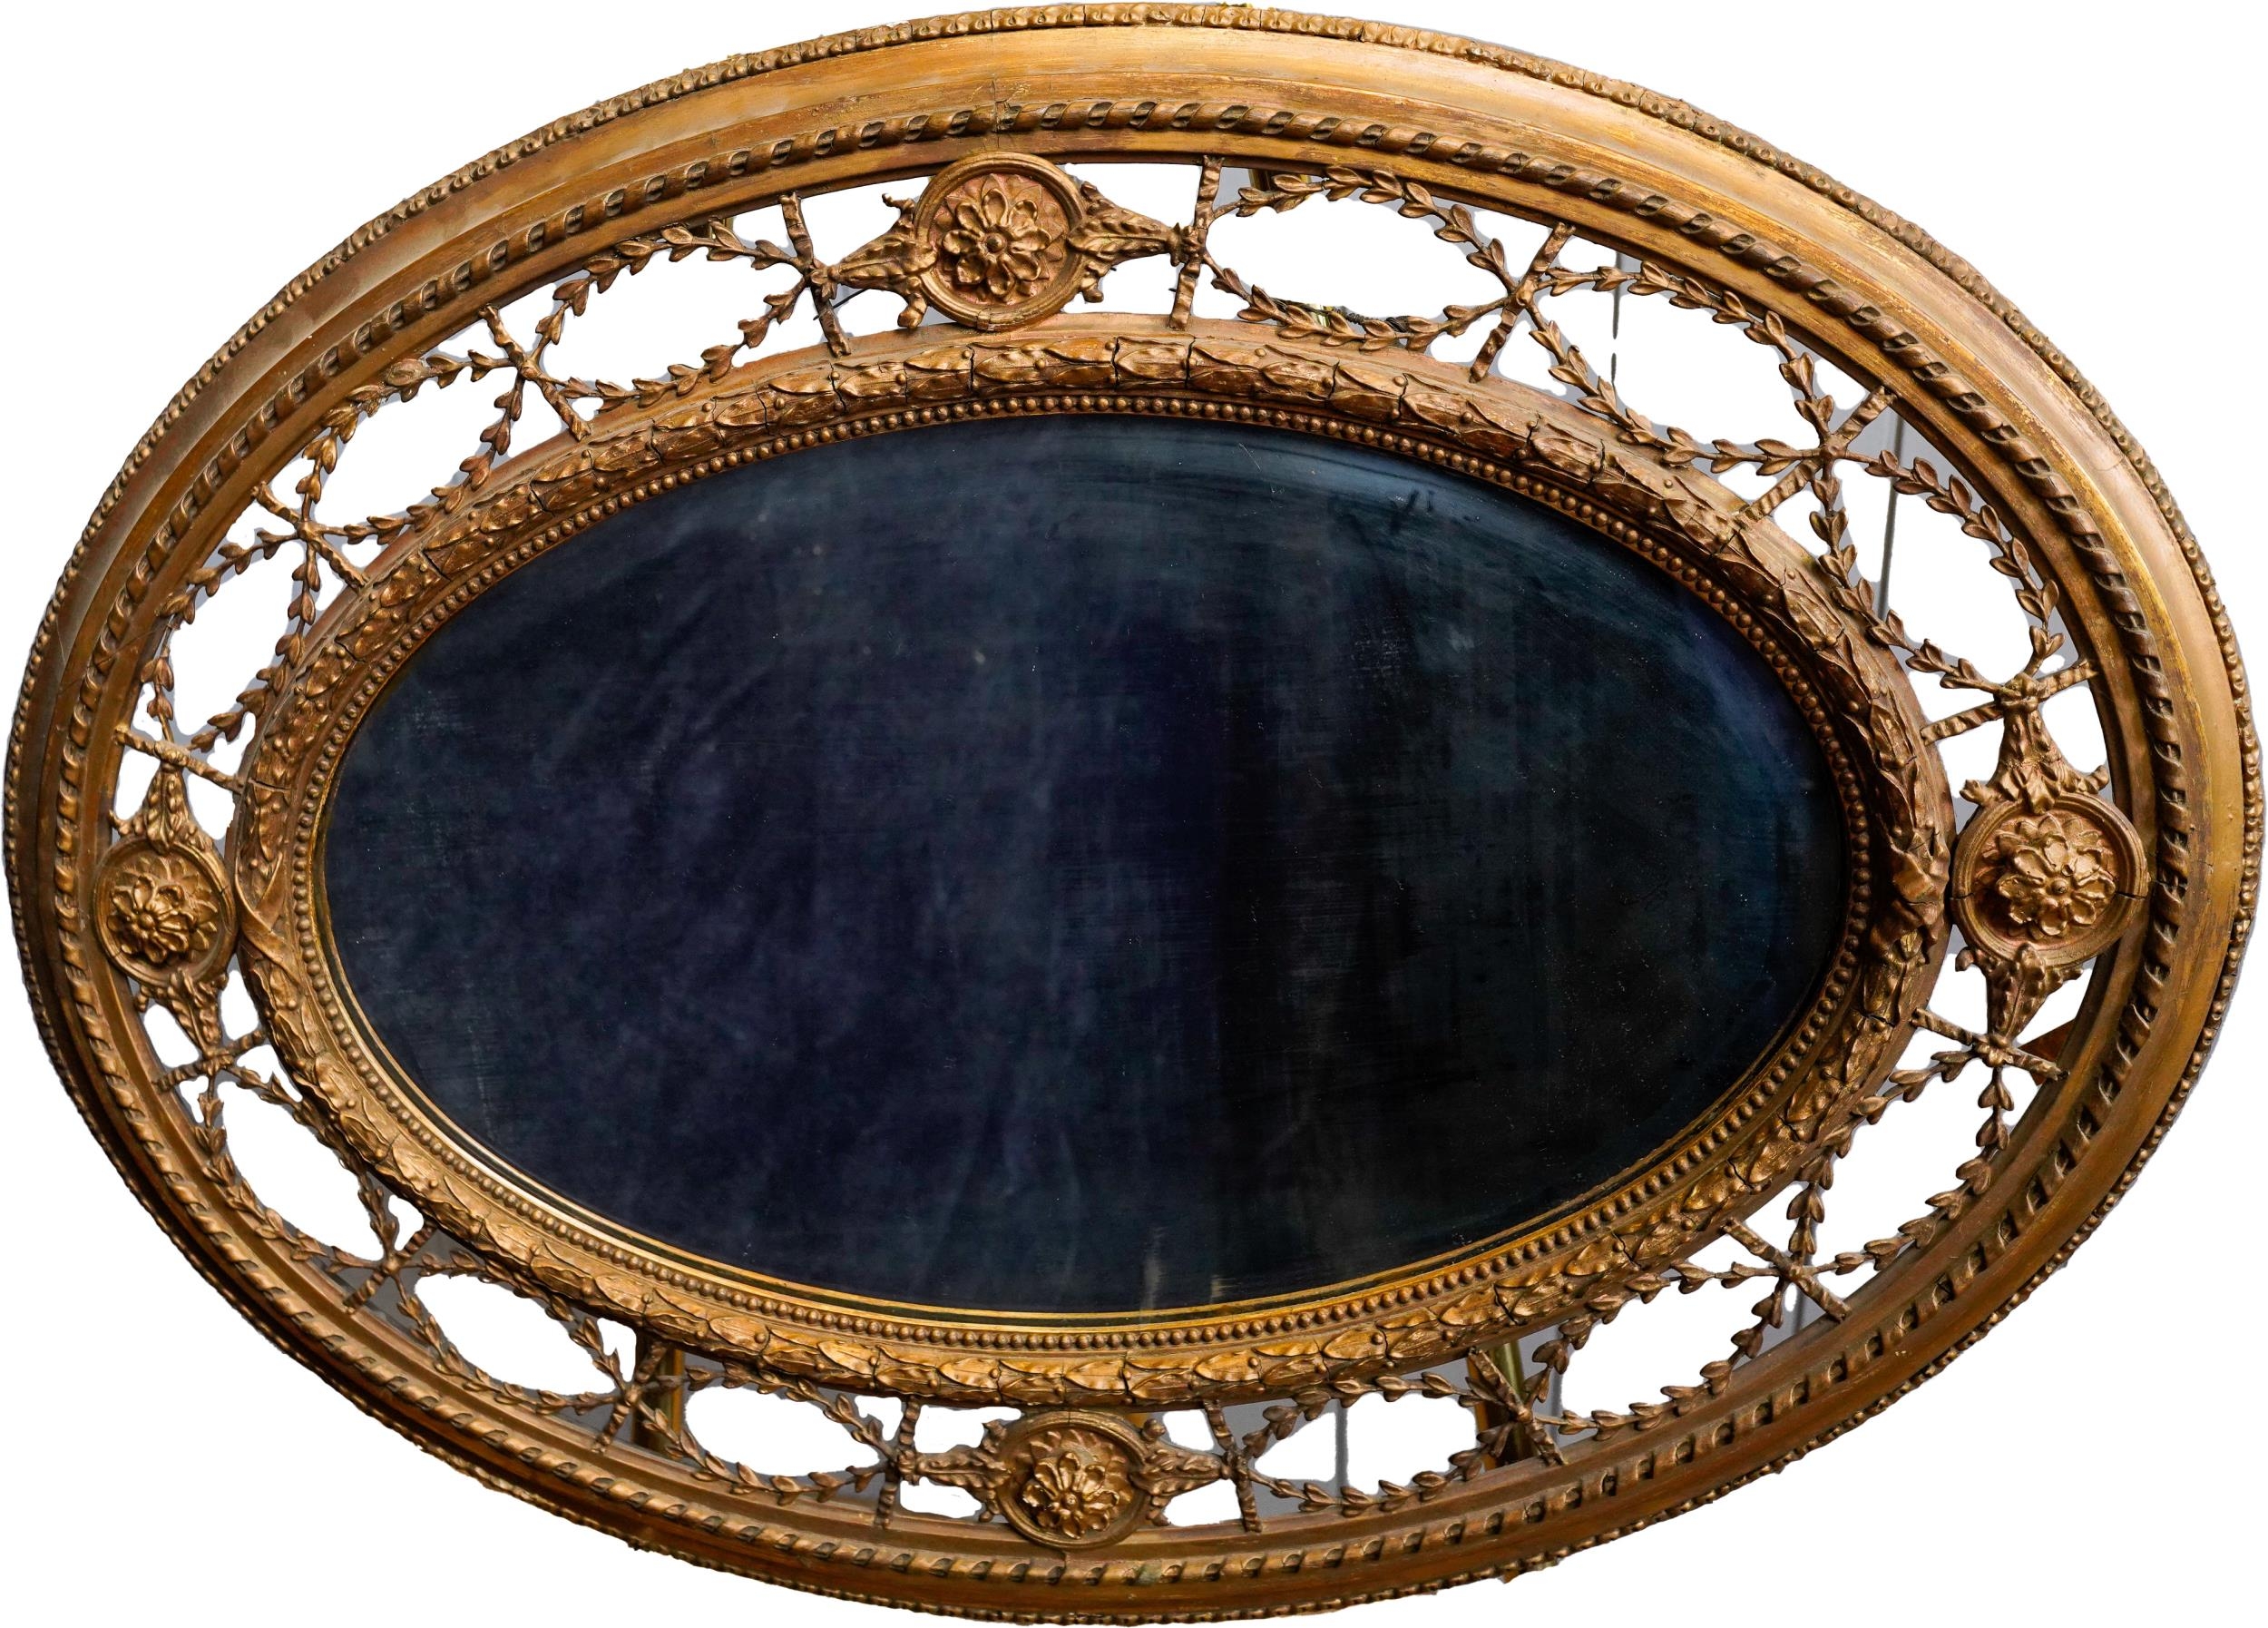 VICTORIAN GILTWOOD AND GESSO OVAL WALL MIRROR 19TH CENTURY the oval plate within an ornate